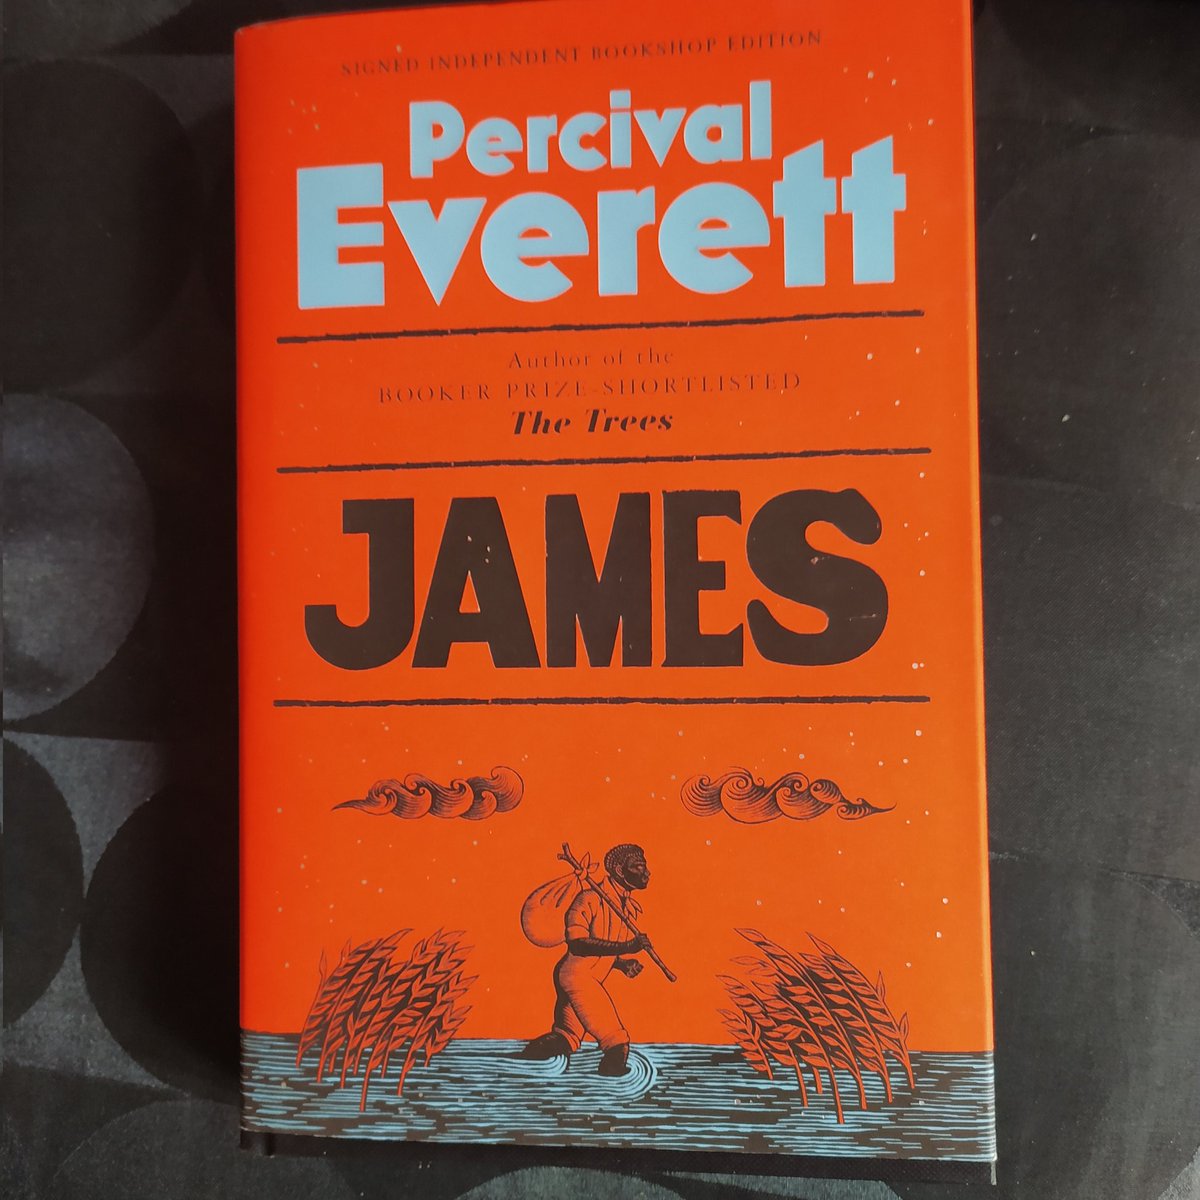 James by Percival Everett. He's done it again. Another superb novel from the outrageously talented Everett. A 5* read for me. #PercivalEverett